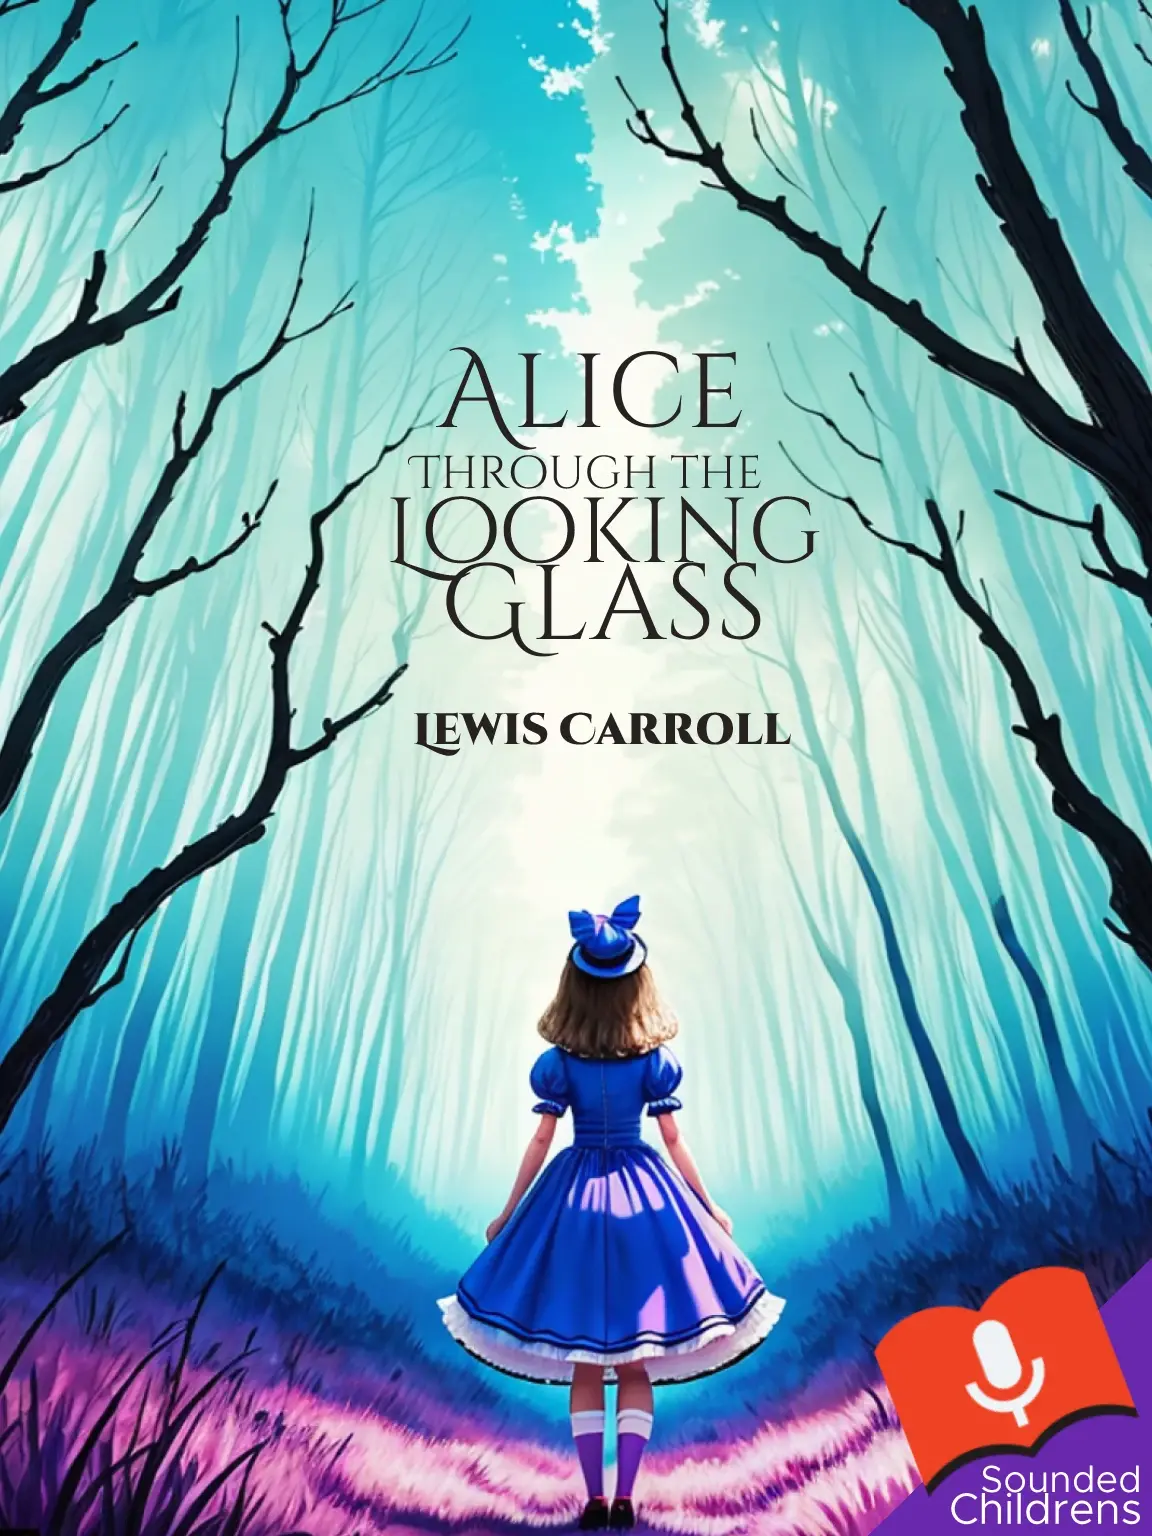 Through the Looking Glass by Lewis Carroll Audiobook